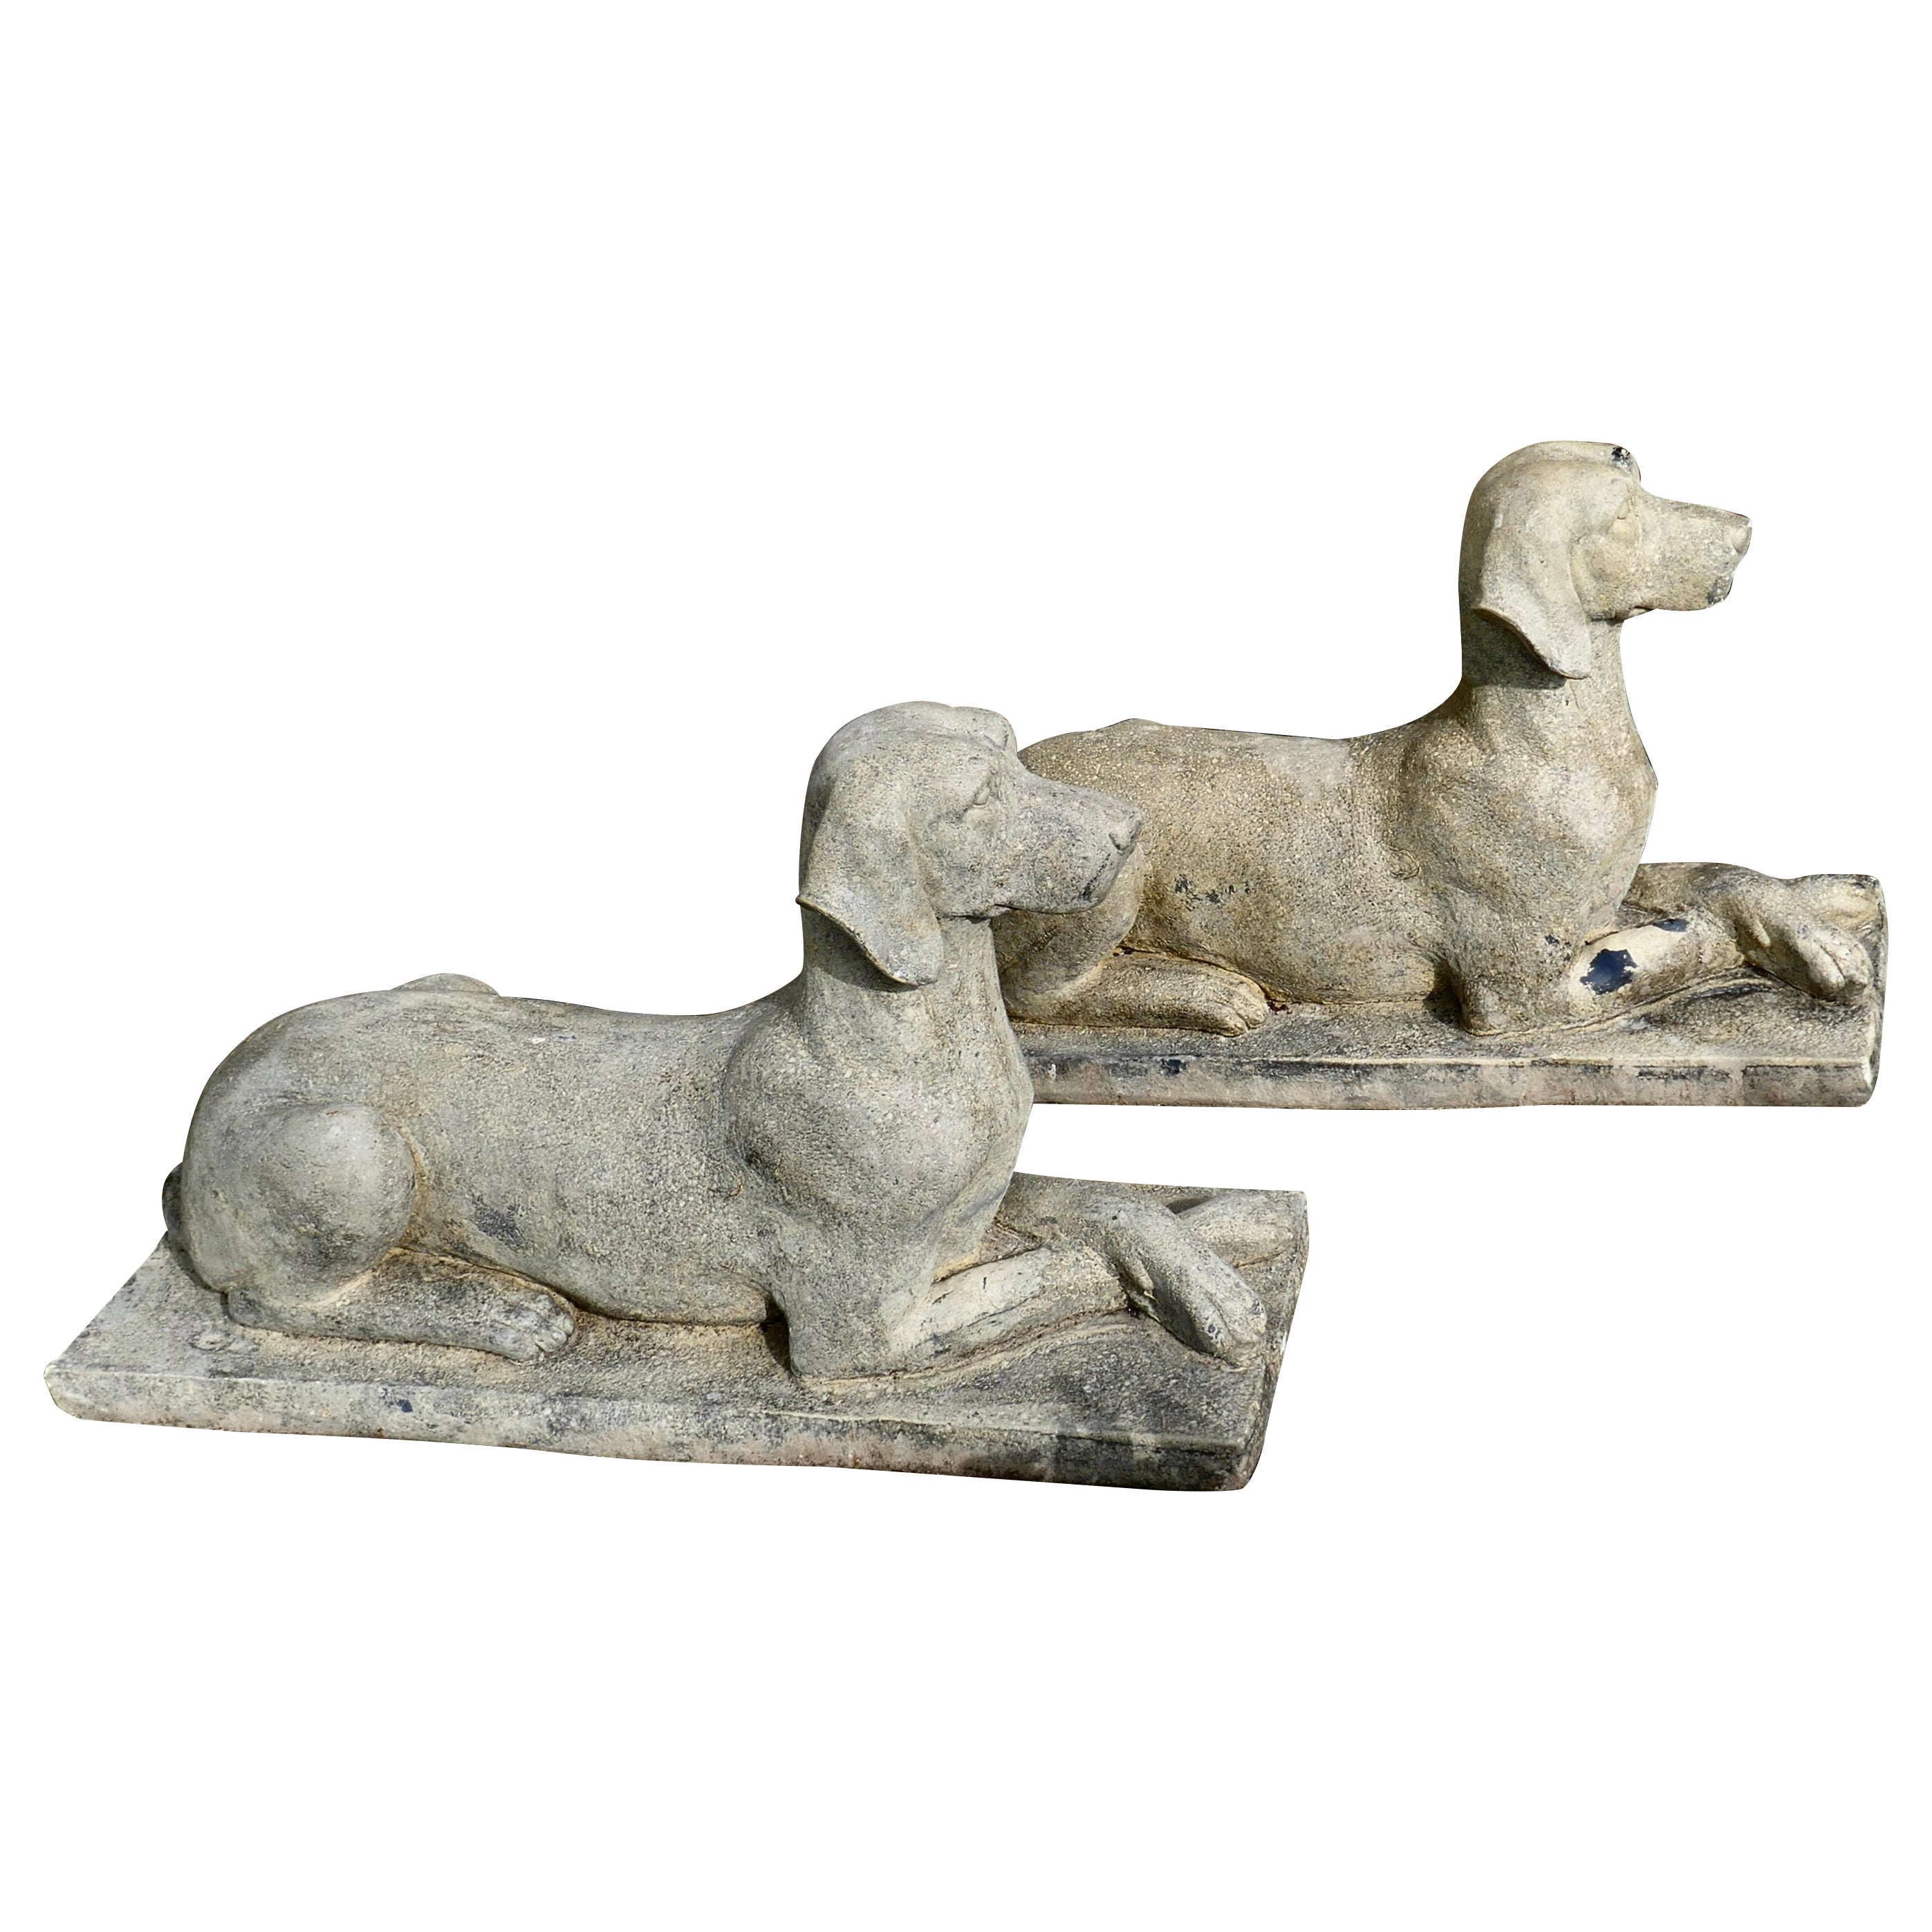 Pair of Large Old Weathered Labradors Statues